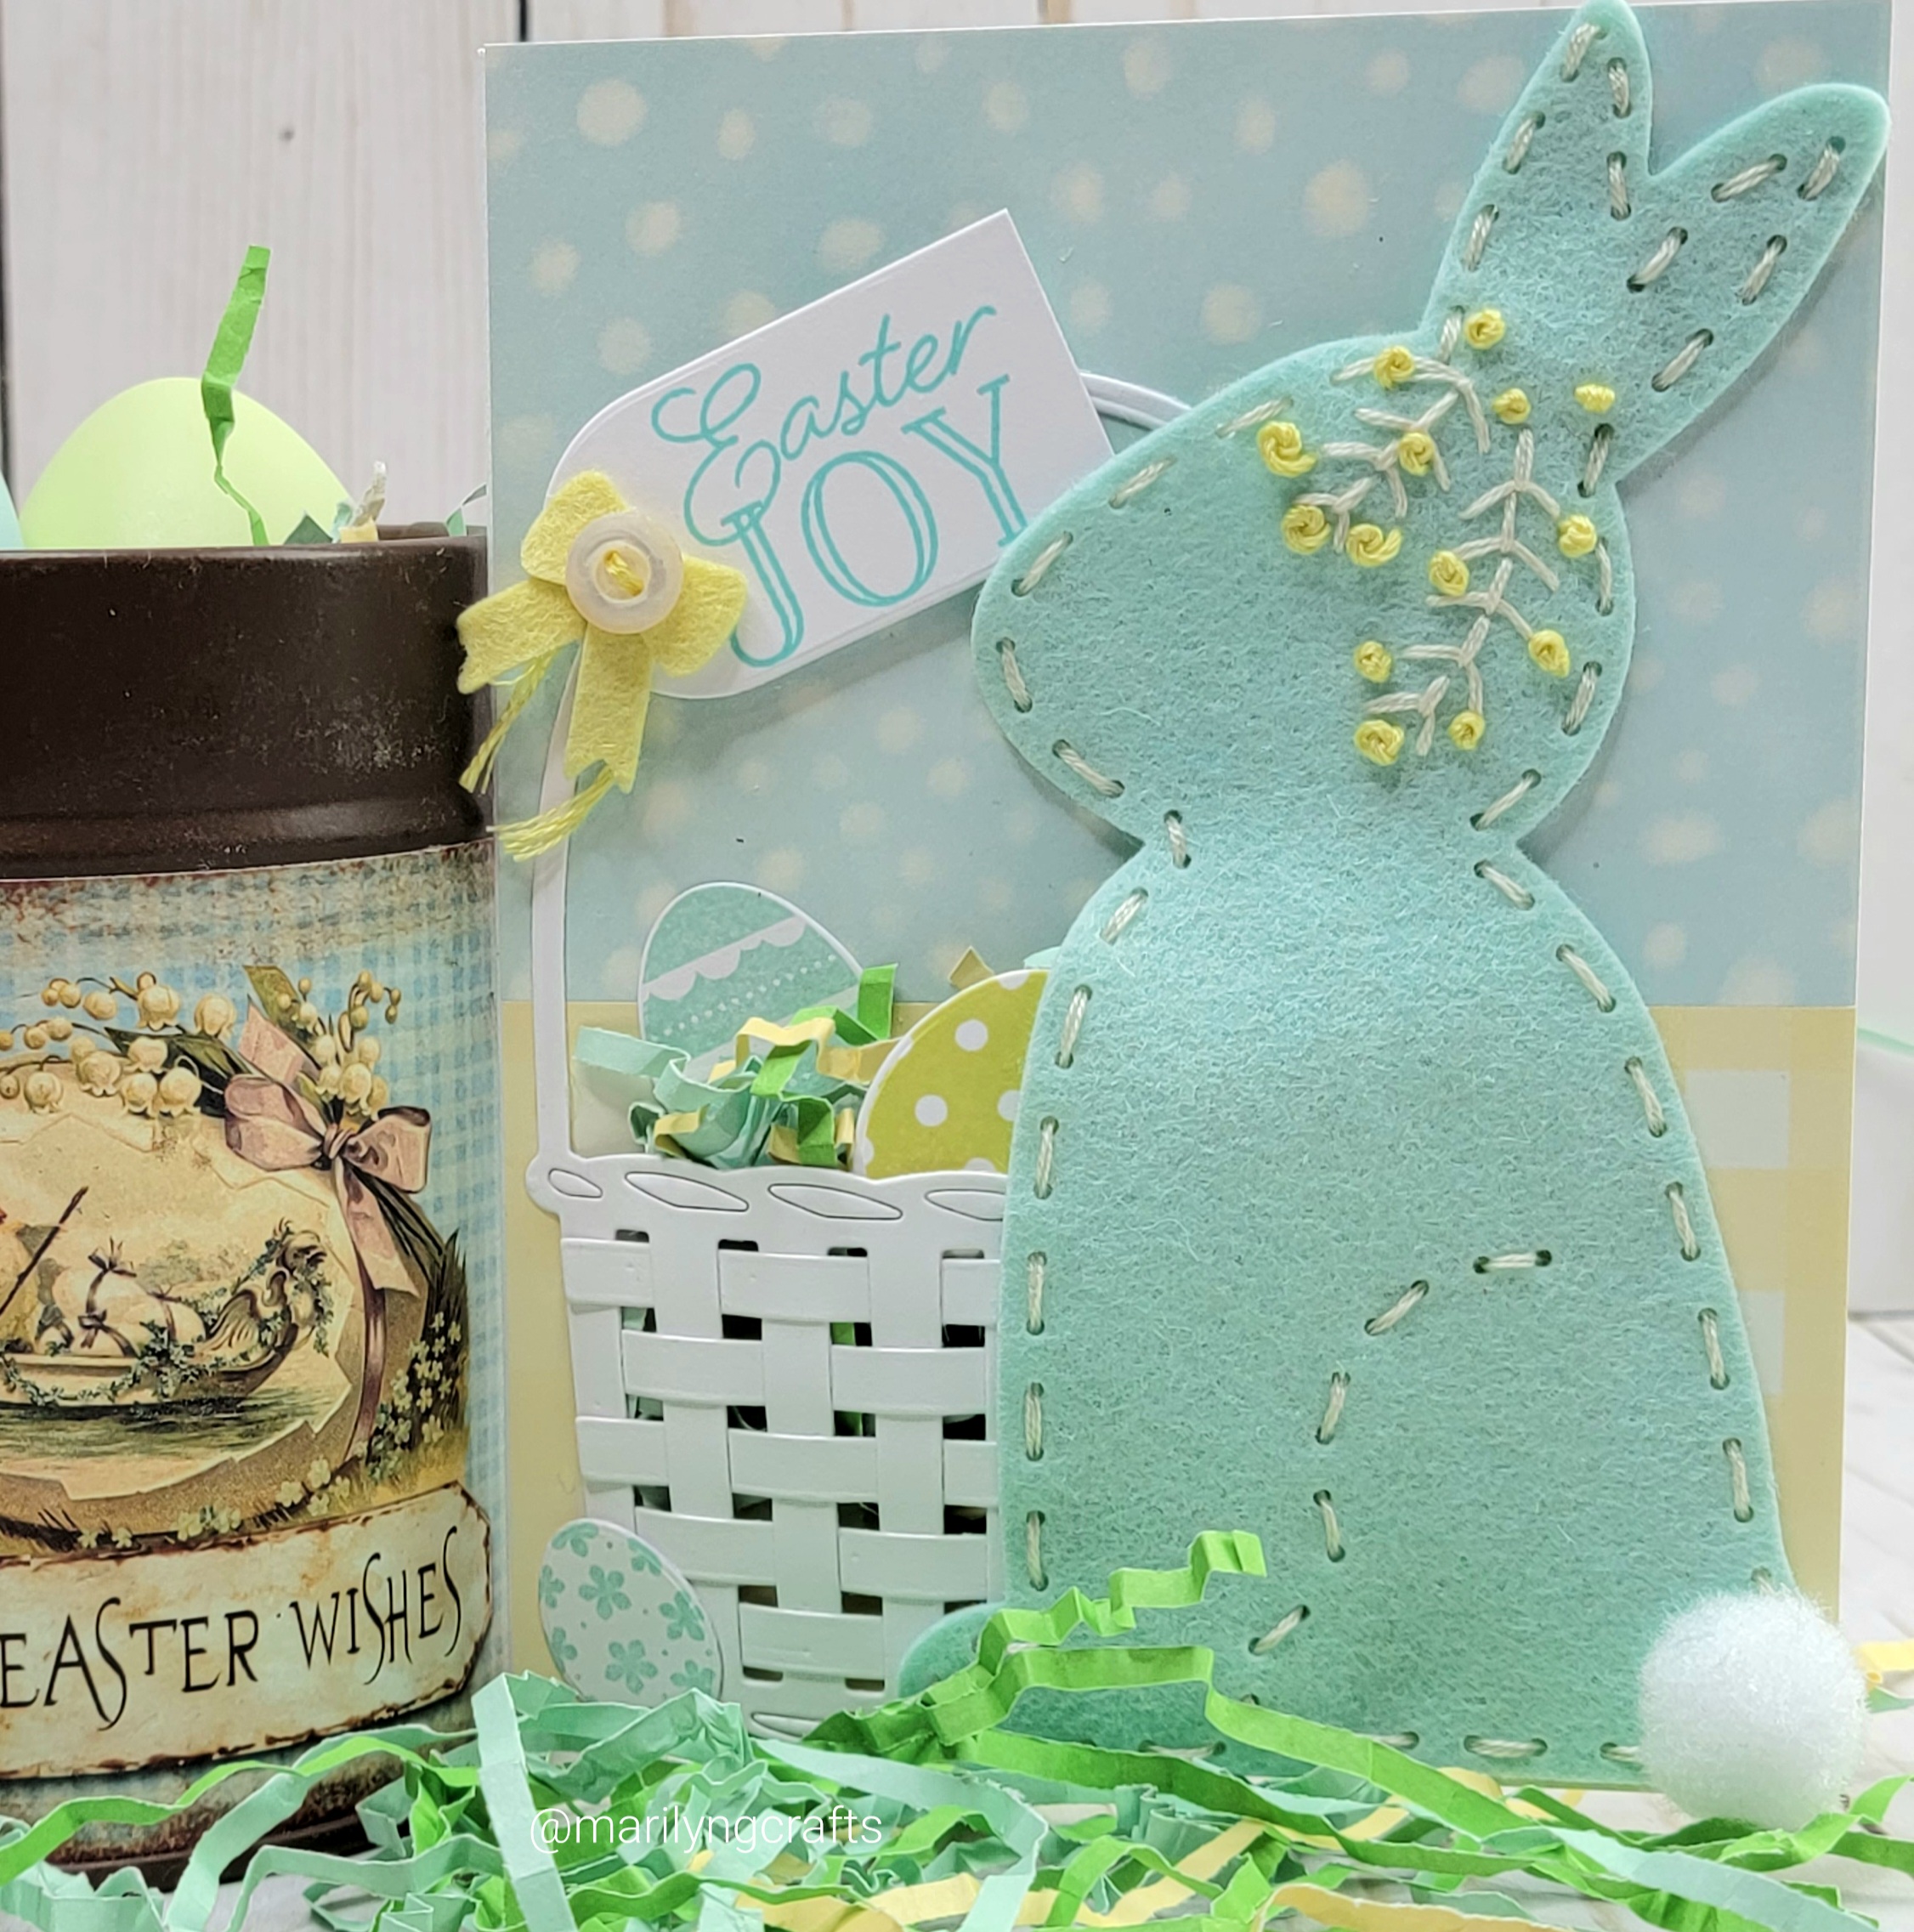 In Stitches: Easter Treats Kit